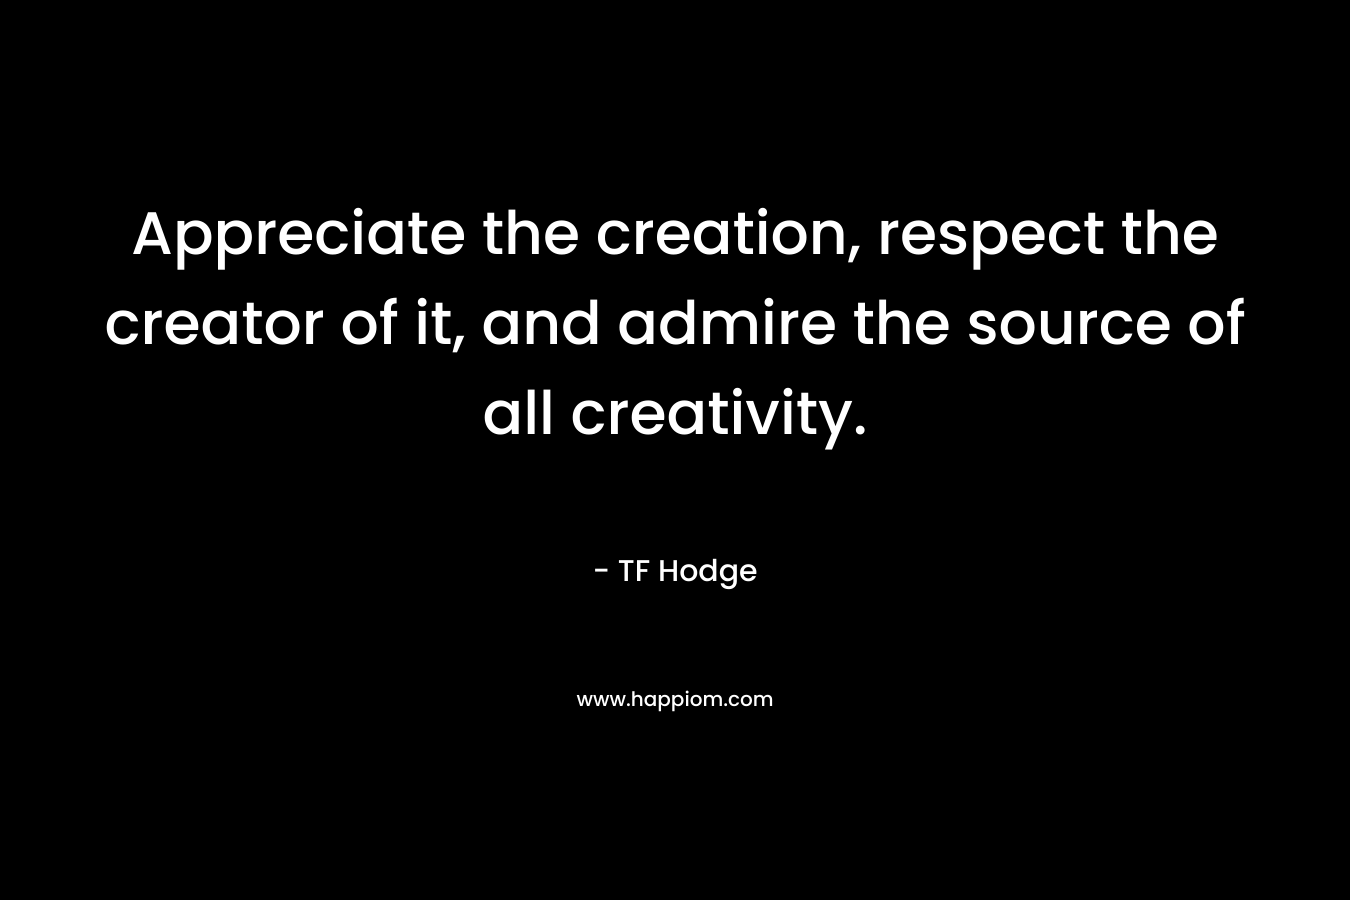 Appreciate the creation, respect the creator of it, and admire the source of all creativity.